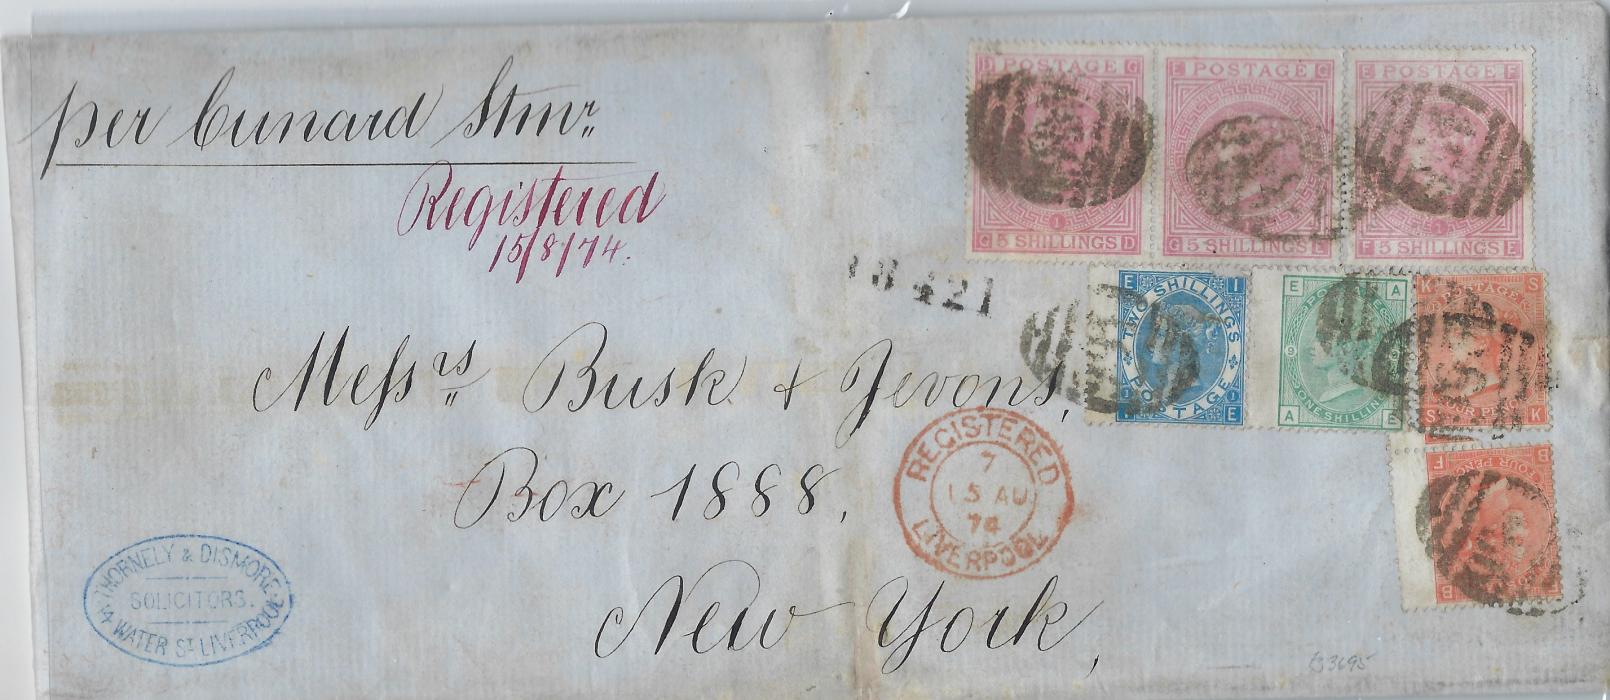 Great Britain 1874 (15 AU) large commercial solicitor’s wrapper registered  to New York “per Cunard Stmr” franked with 1865-67 4d. deep vermillion plate 13 (2), 1867-80 2/- blue with small corner fault, 1867-83 5/- rose (watermark Maltese Cross), plate 1 FE plus GD-GE pair with 1873-80 1/- green plate 9, each cancelled by ‘466’ obliterators, manuscript “Registered/ 15/8/74” with double circle Registered Liverpool despatch cds in red, the reverse with three red wax seals and the pink ribbon still attached. Central vertical crease and 2/- defect. A fine and most unusual franking, Ex H. Fraser and Klempka.